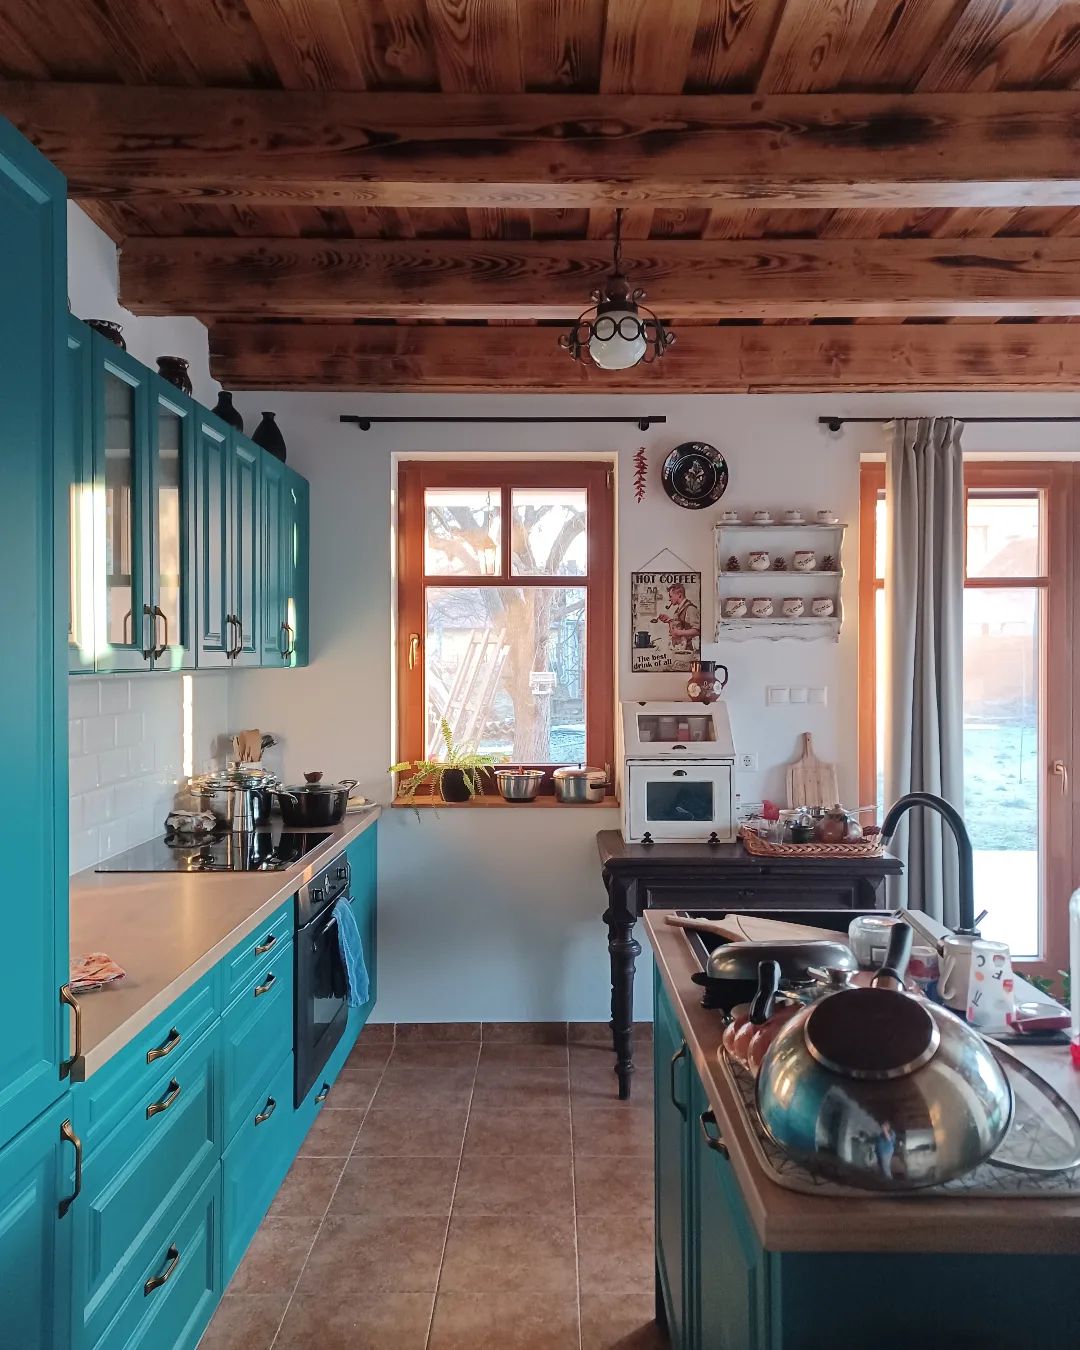 A kitchen with turquoise cabinets and wooden beams.